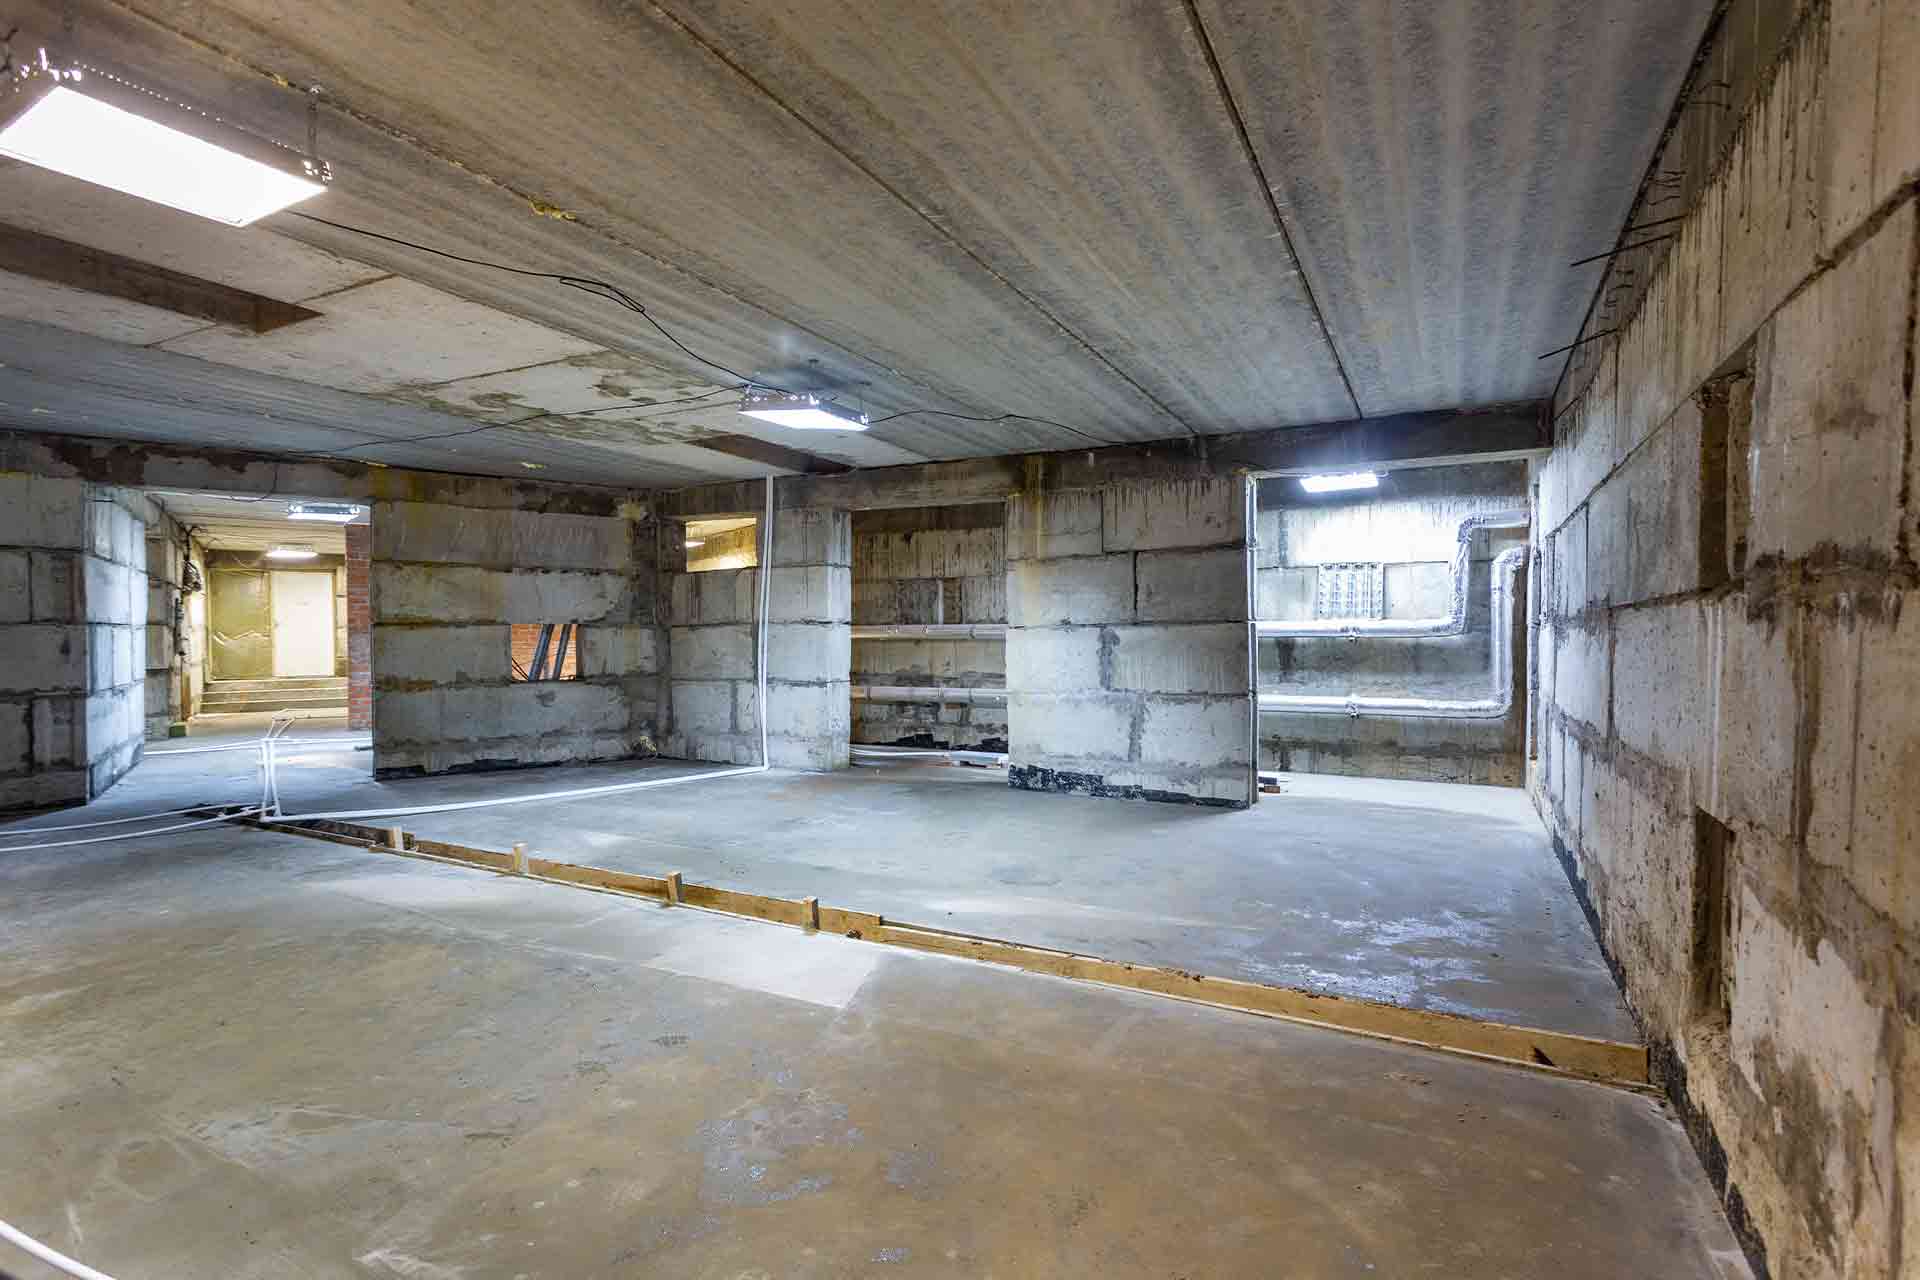 How Much Does Lowering a Basement Floor Cost in 2022? | Checkatrade